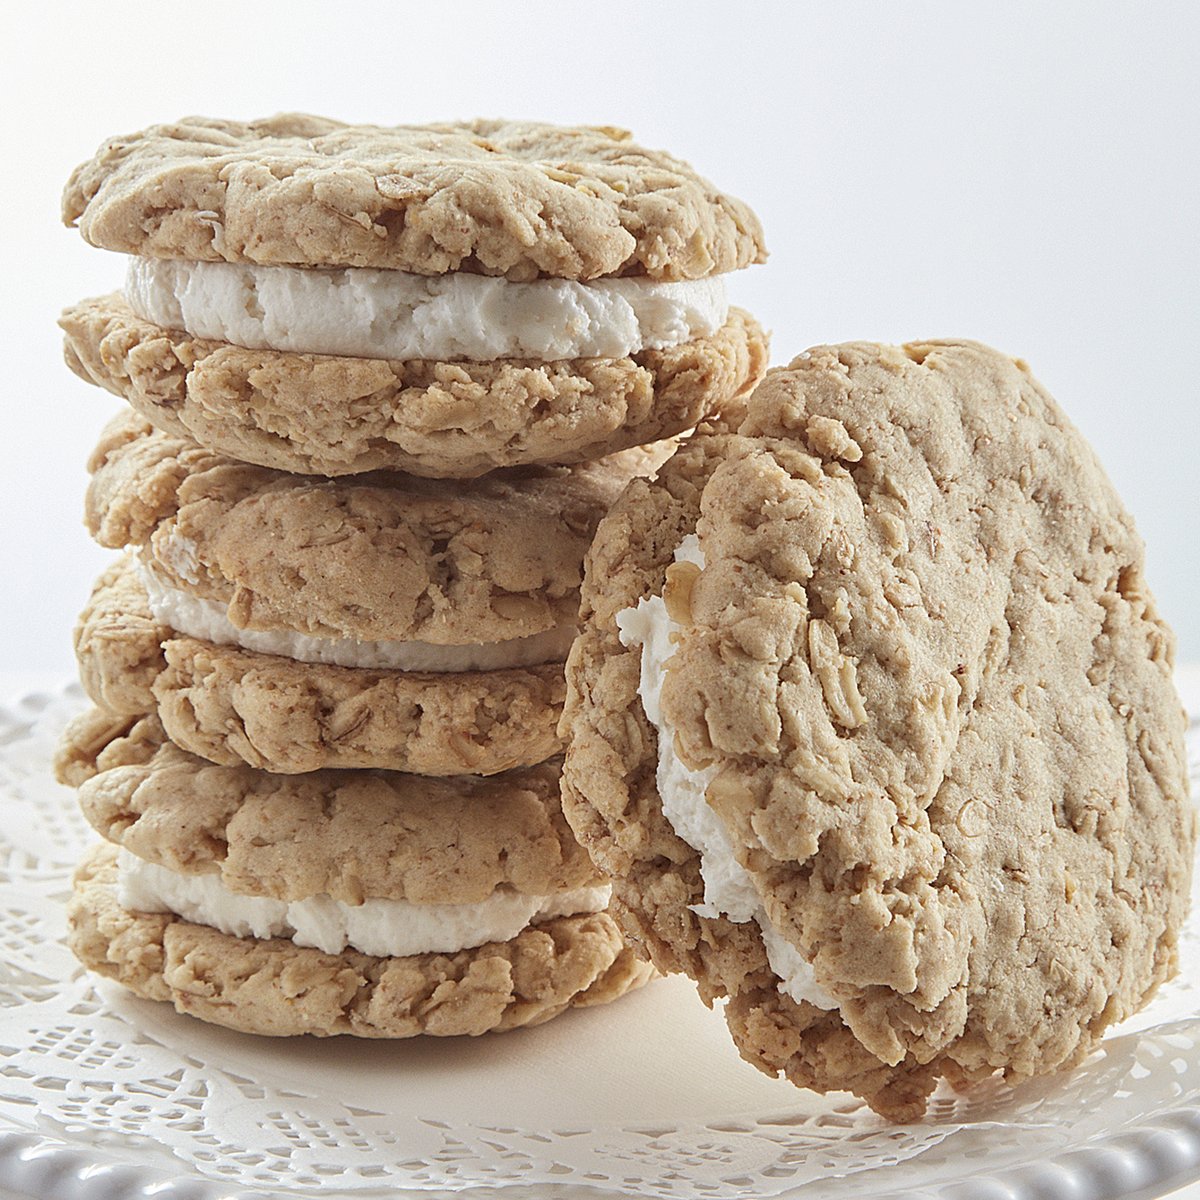 Our Vegan Oatmeal Whoopie Pies need to be on your list of things to try at Dessert Gallery. They are a delicious classic available year-round at the Café. Whoopie!